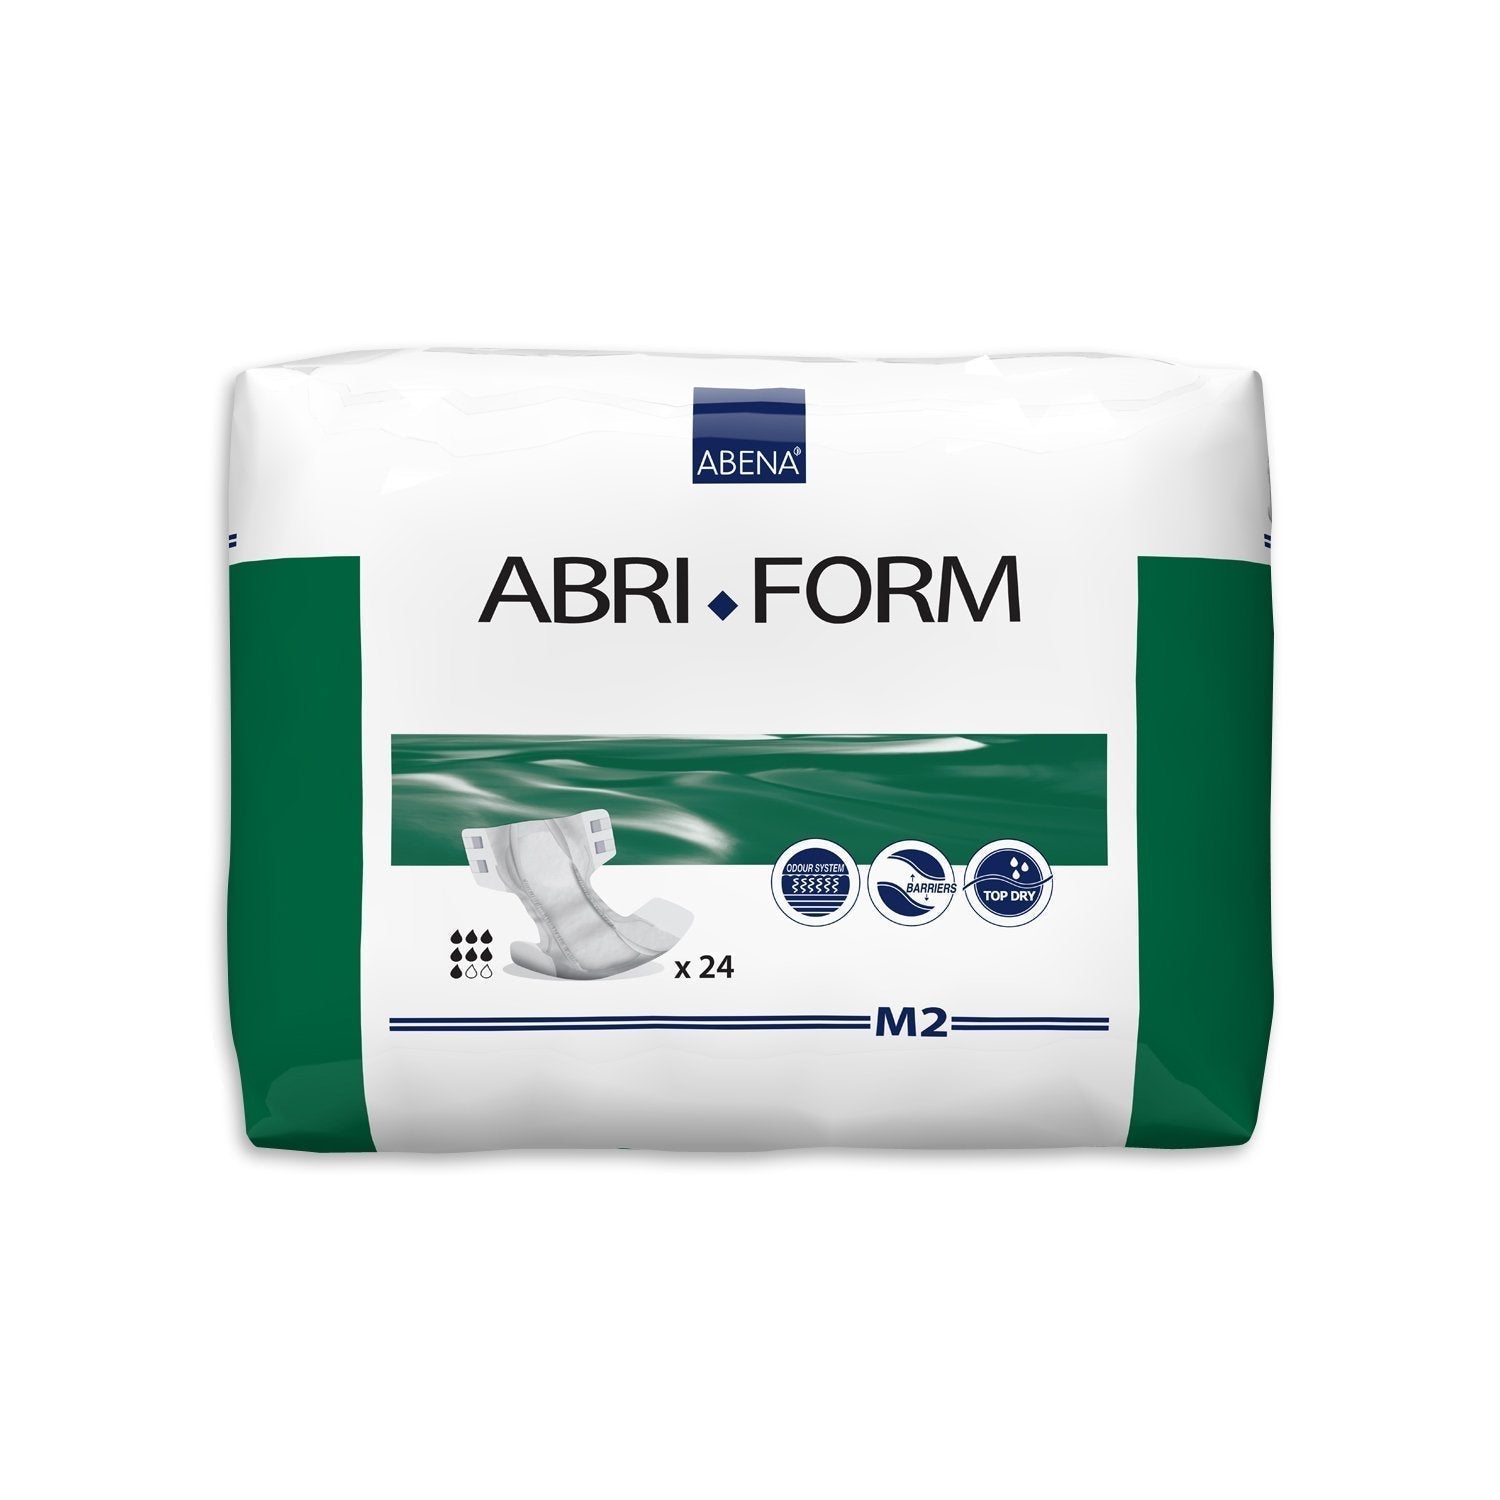 Abena Abri-Form Comfort M2 Blue 2300ml 70-110cm - CT/96 Pads, Diapers And Protectors Carton of 96 